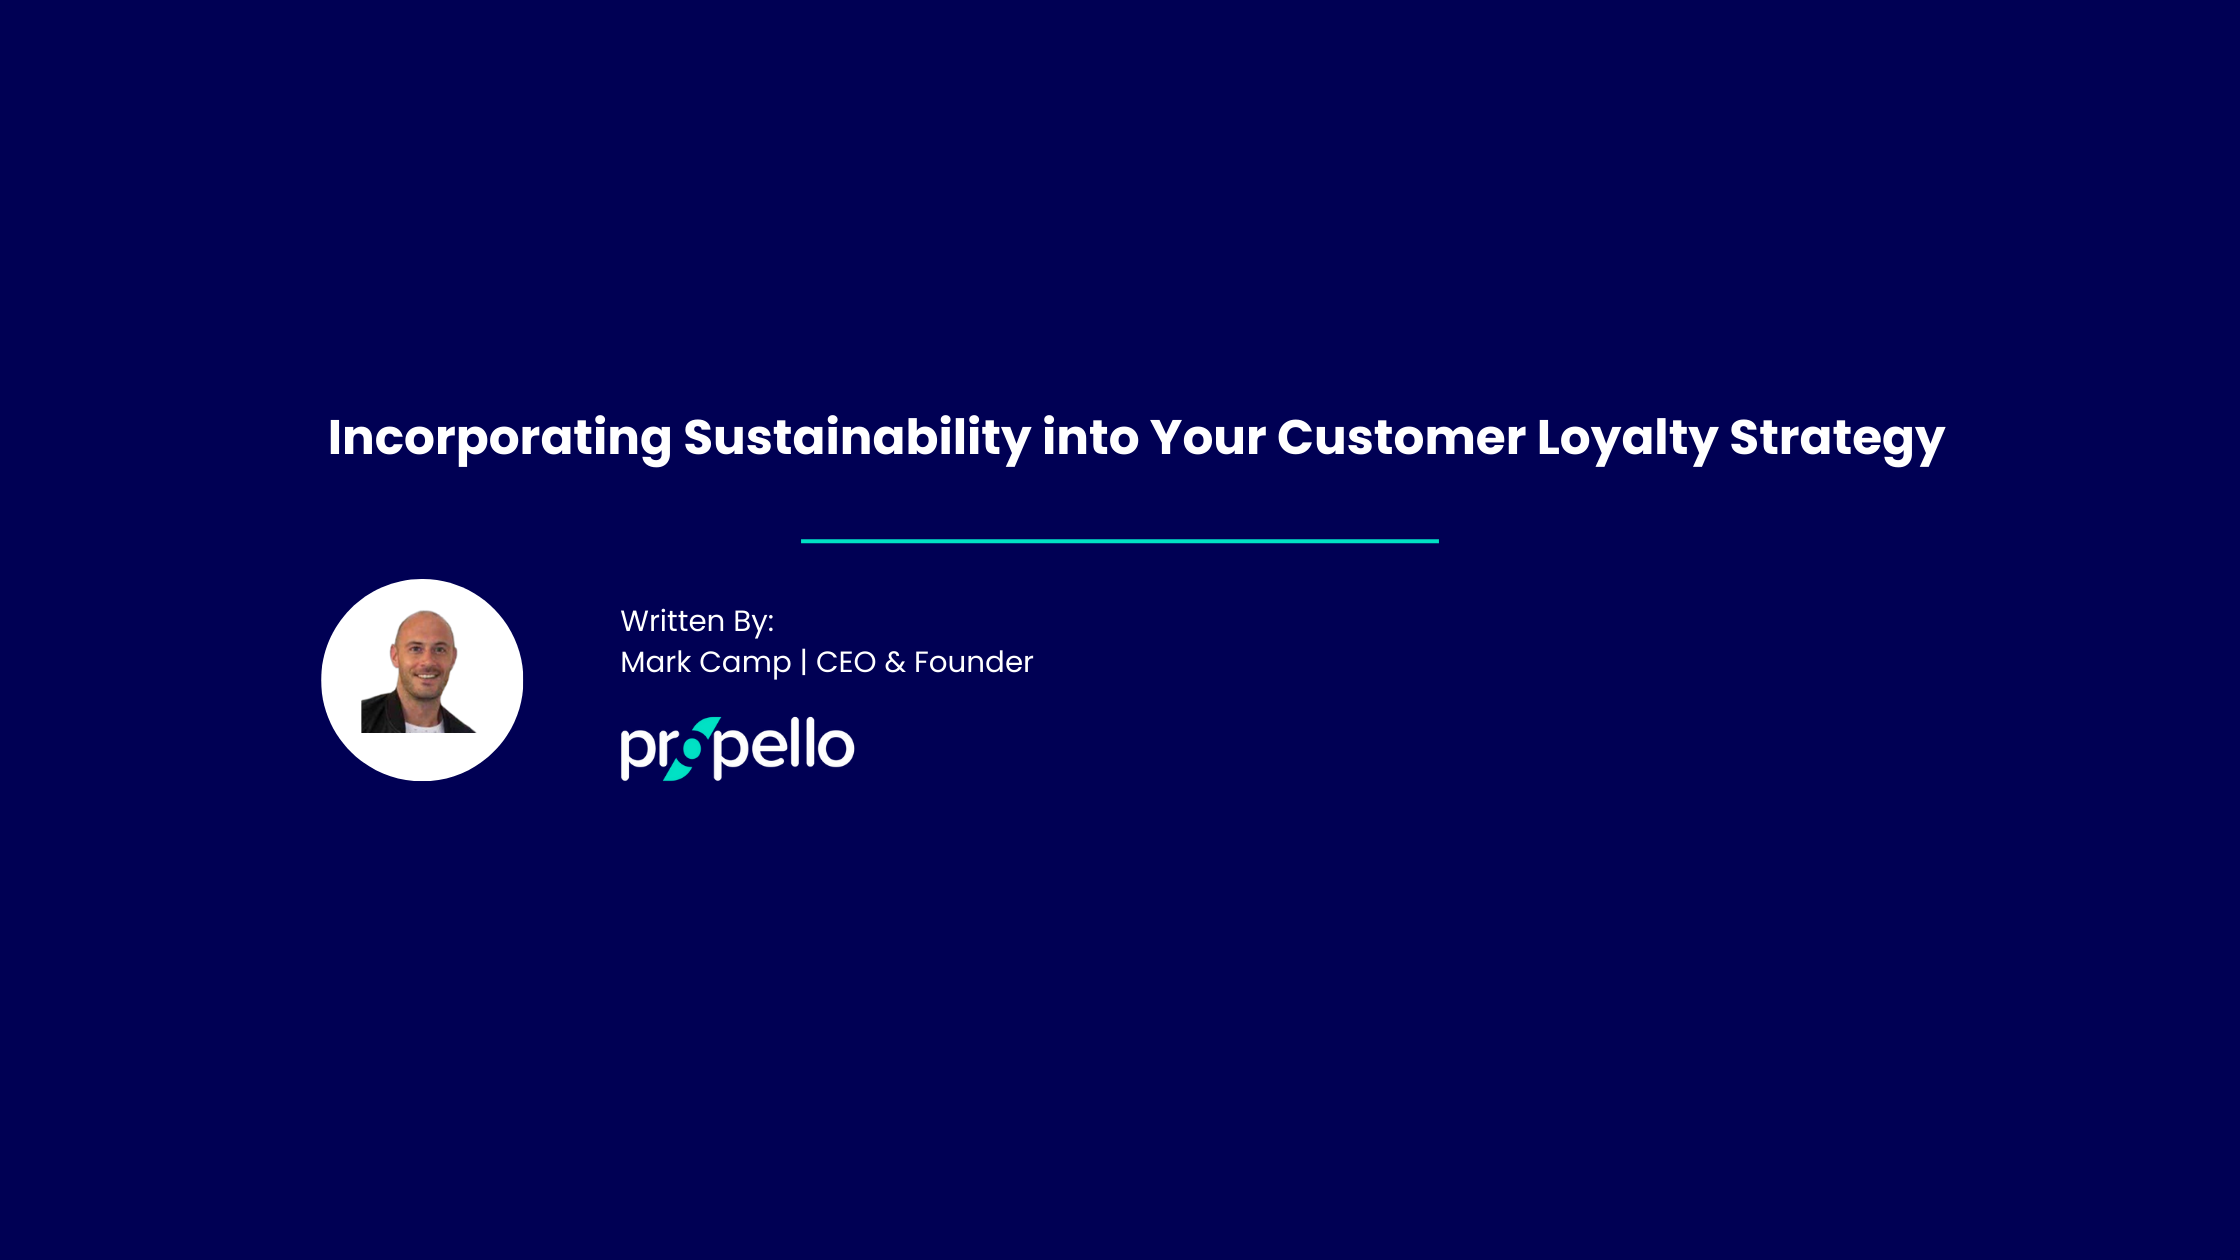 Sustainability and customer loyalty